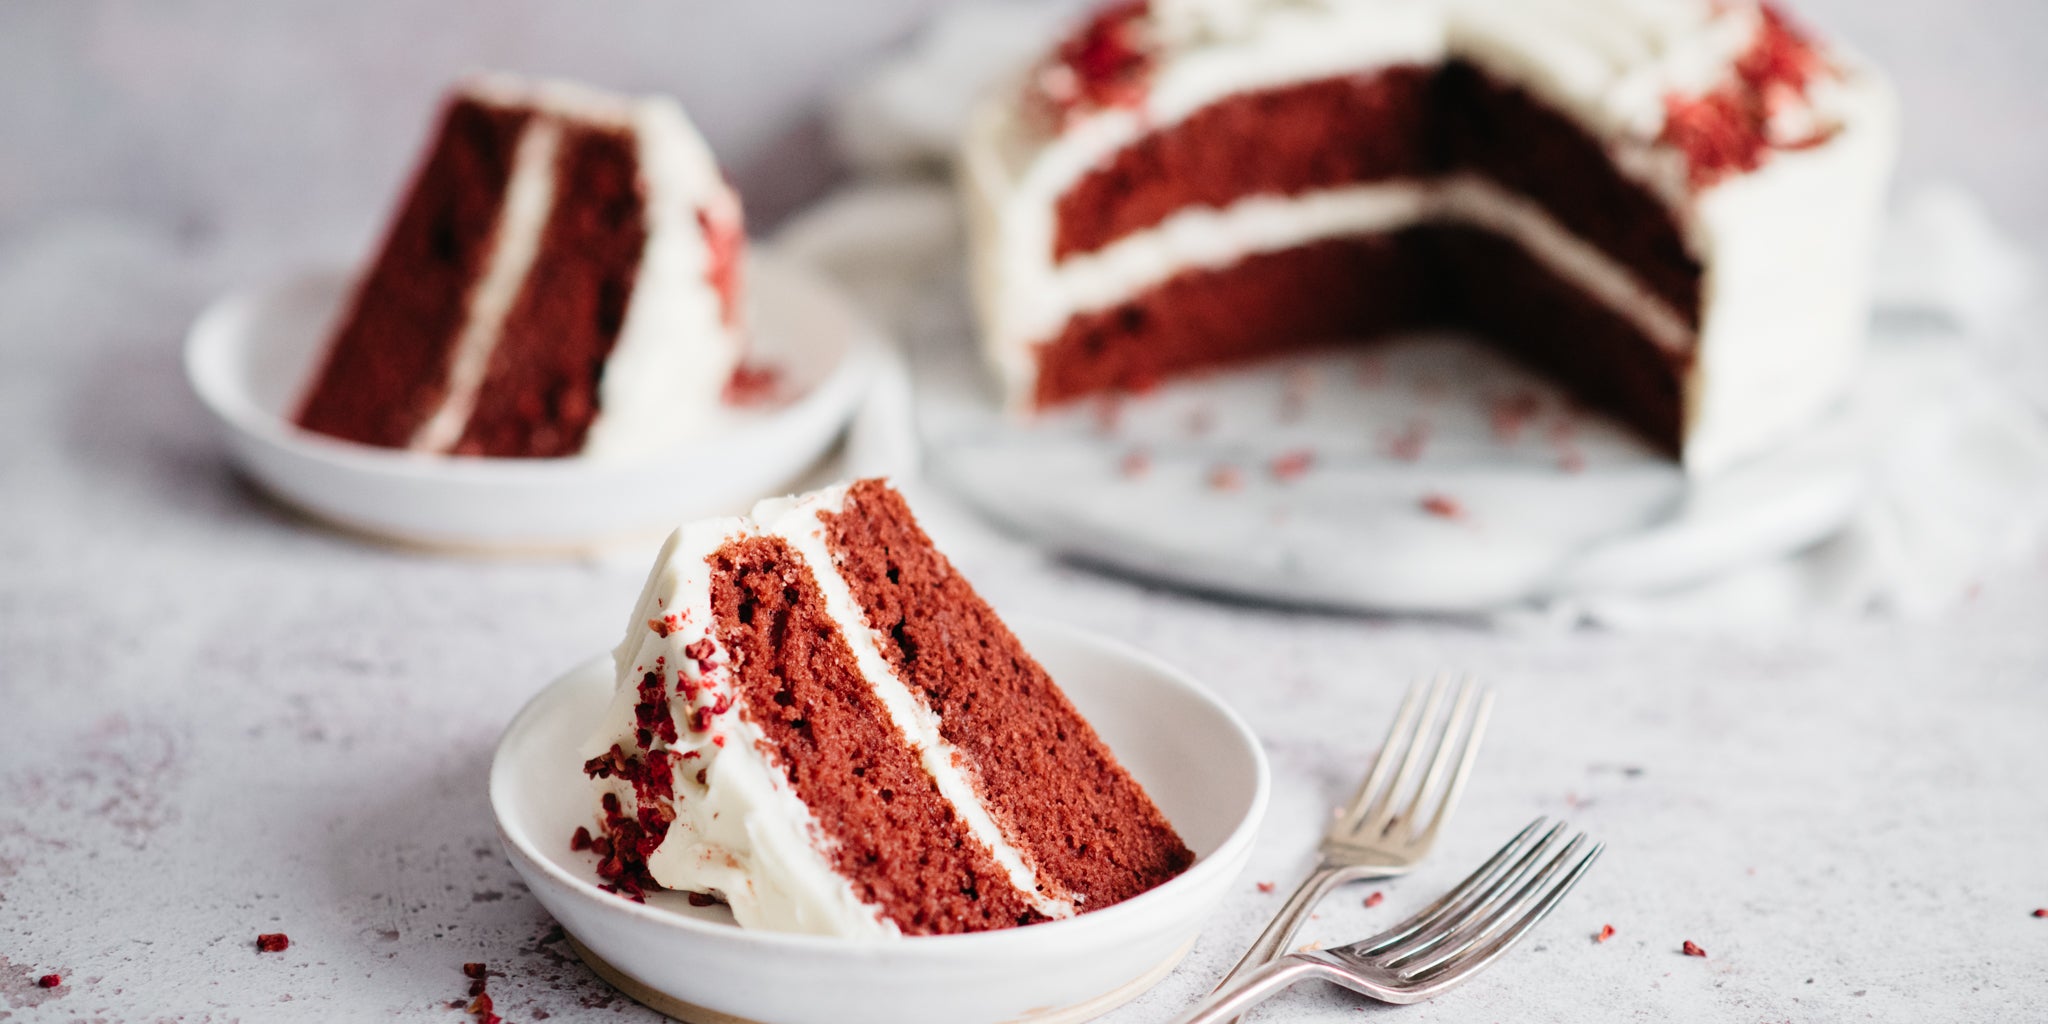 Close up of a slice of red velvet cake served on a plate, showing the layers of cream cheese icing and sponge